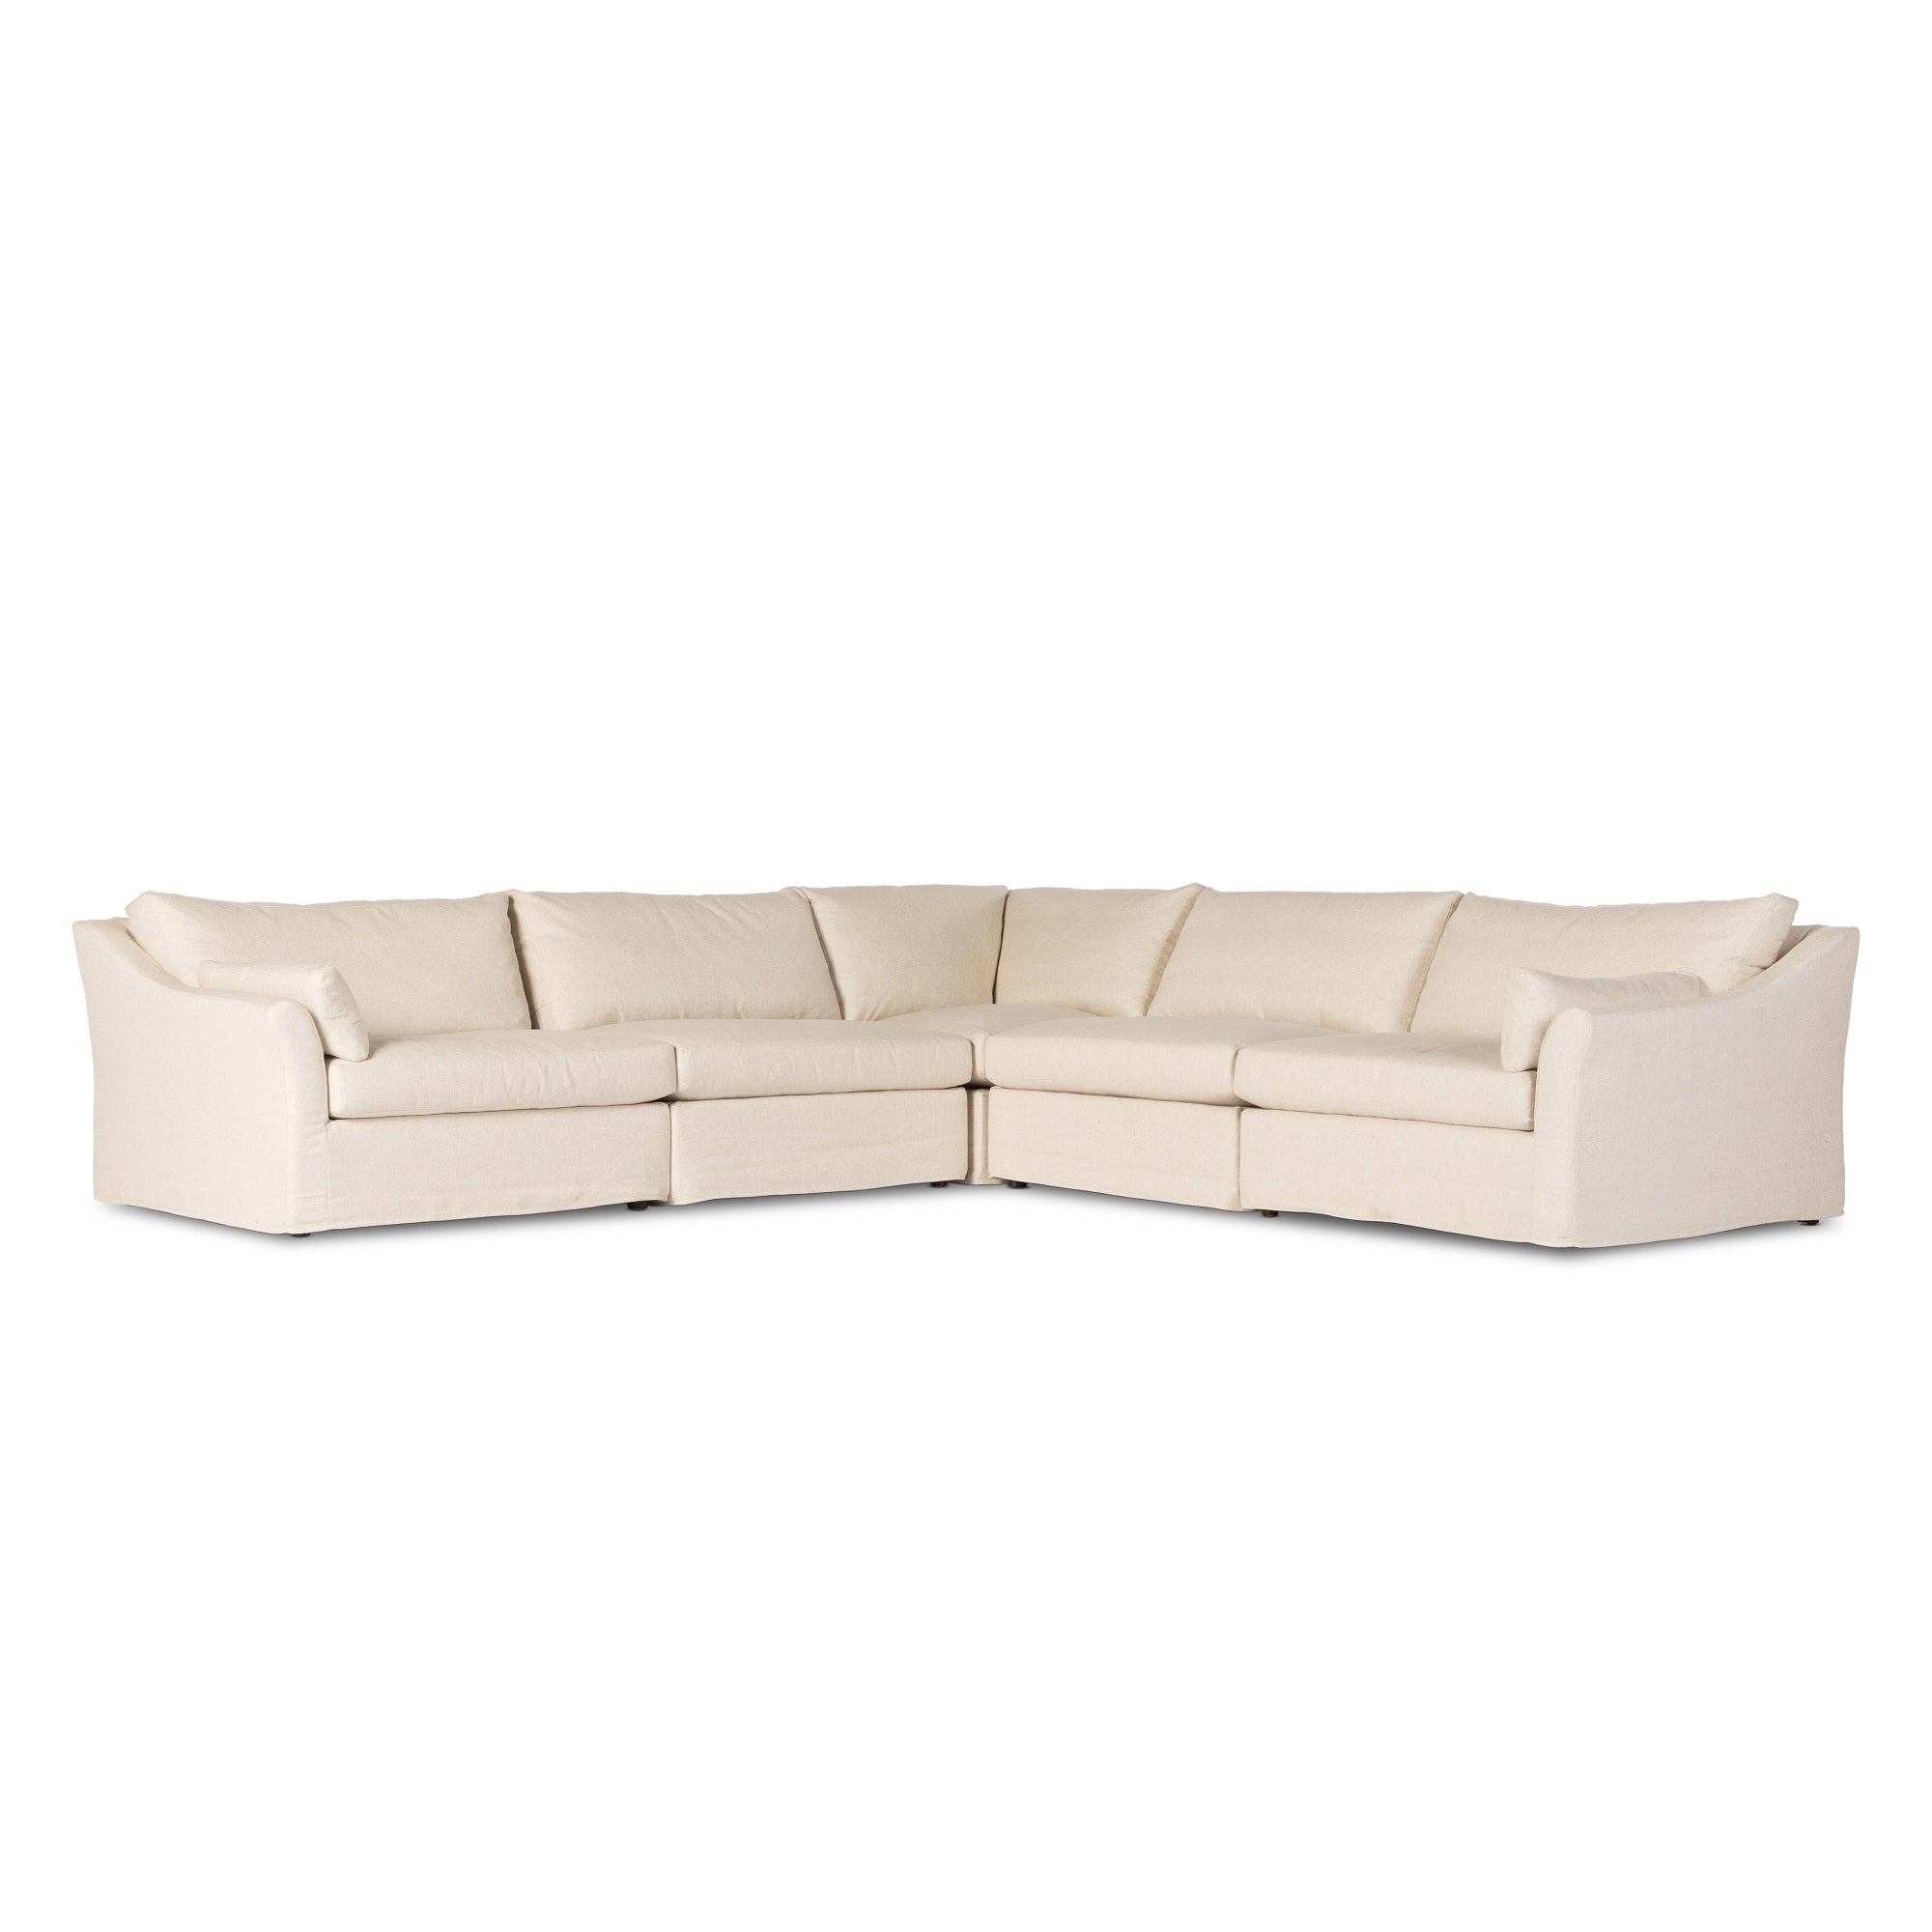 Delray 5pc Slipcover Sectional